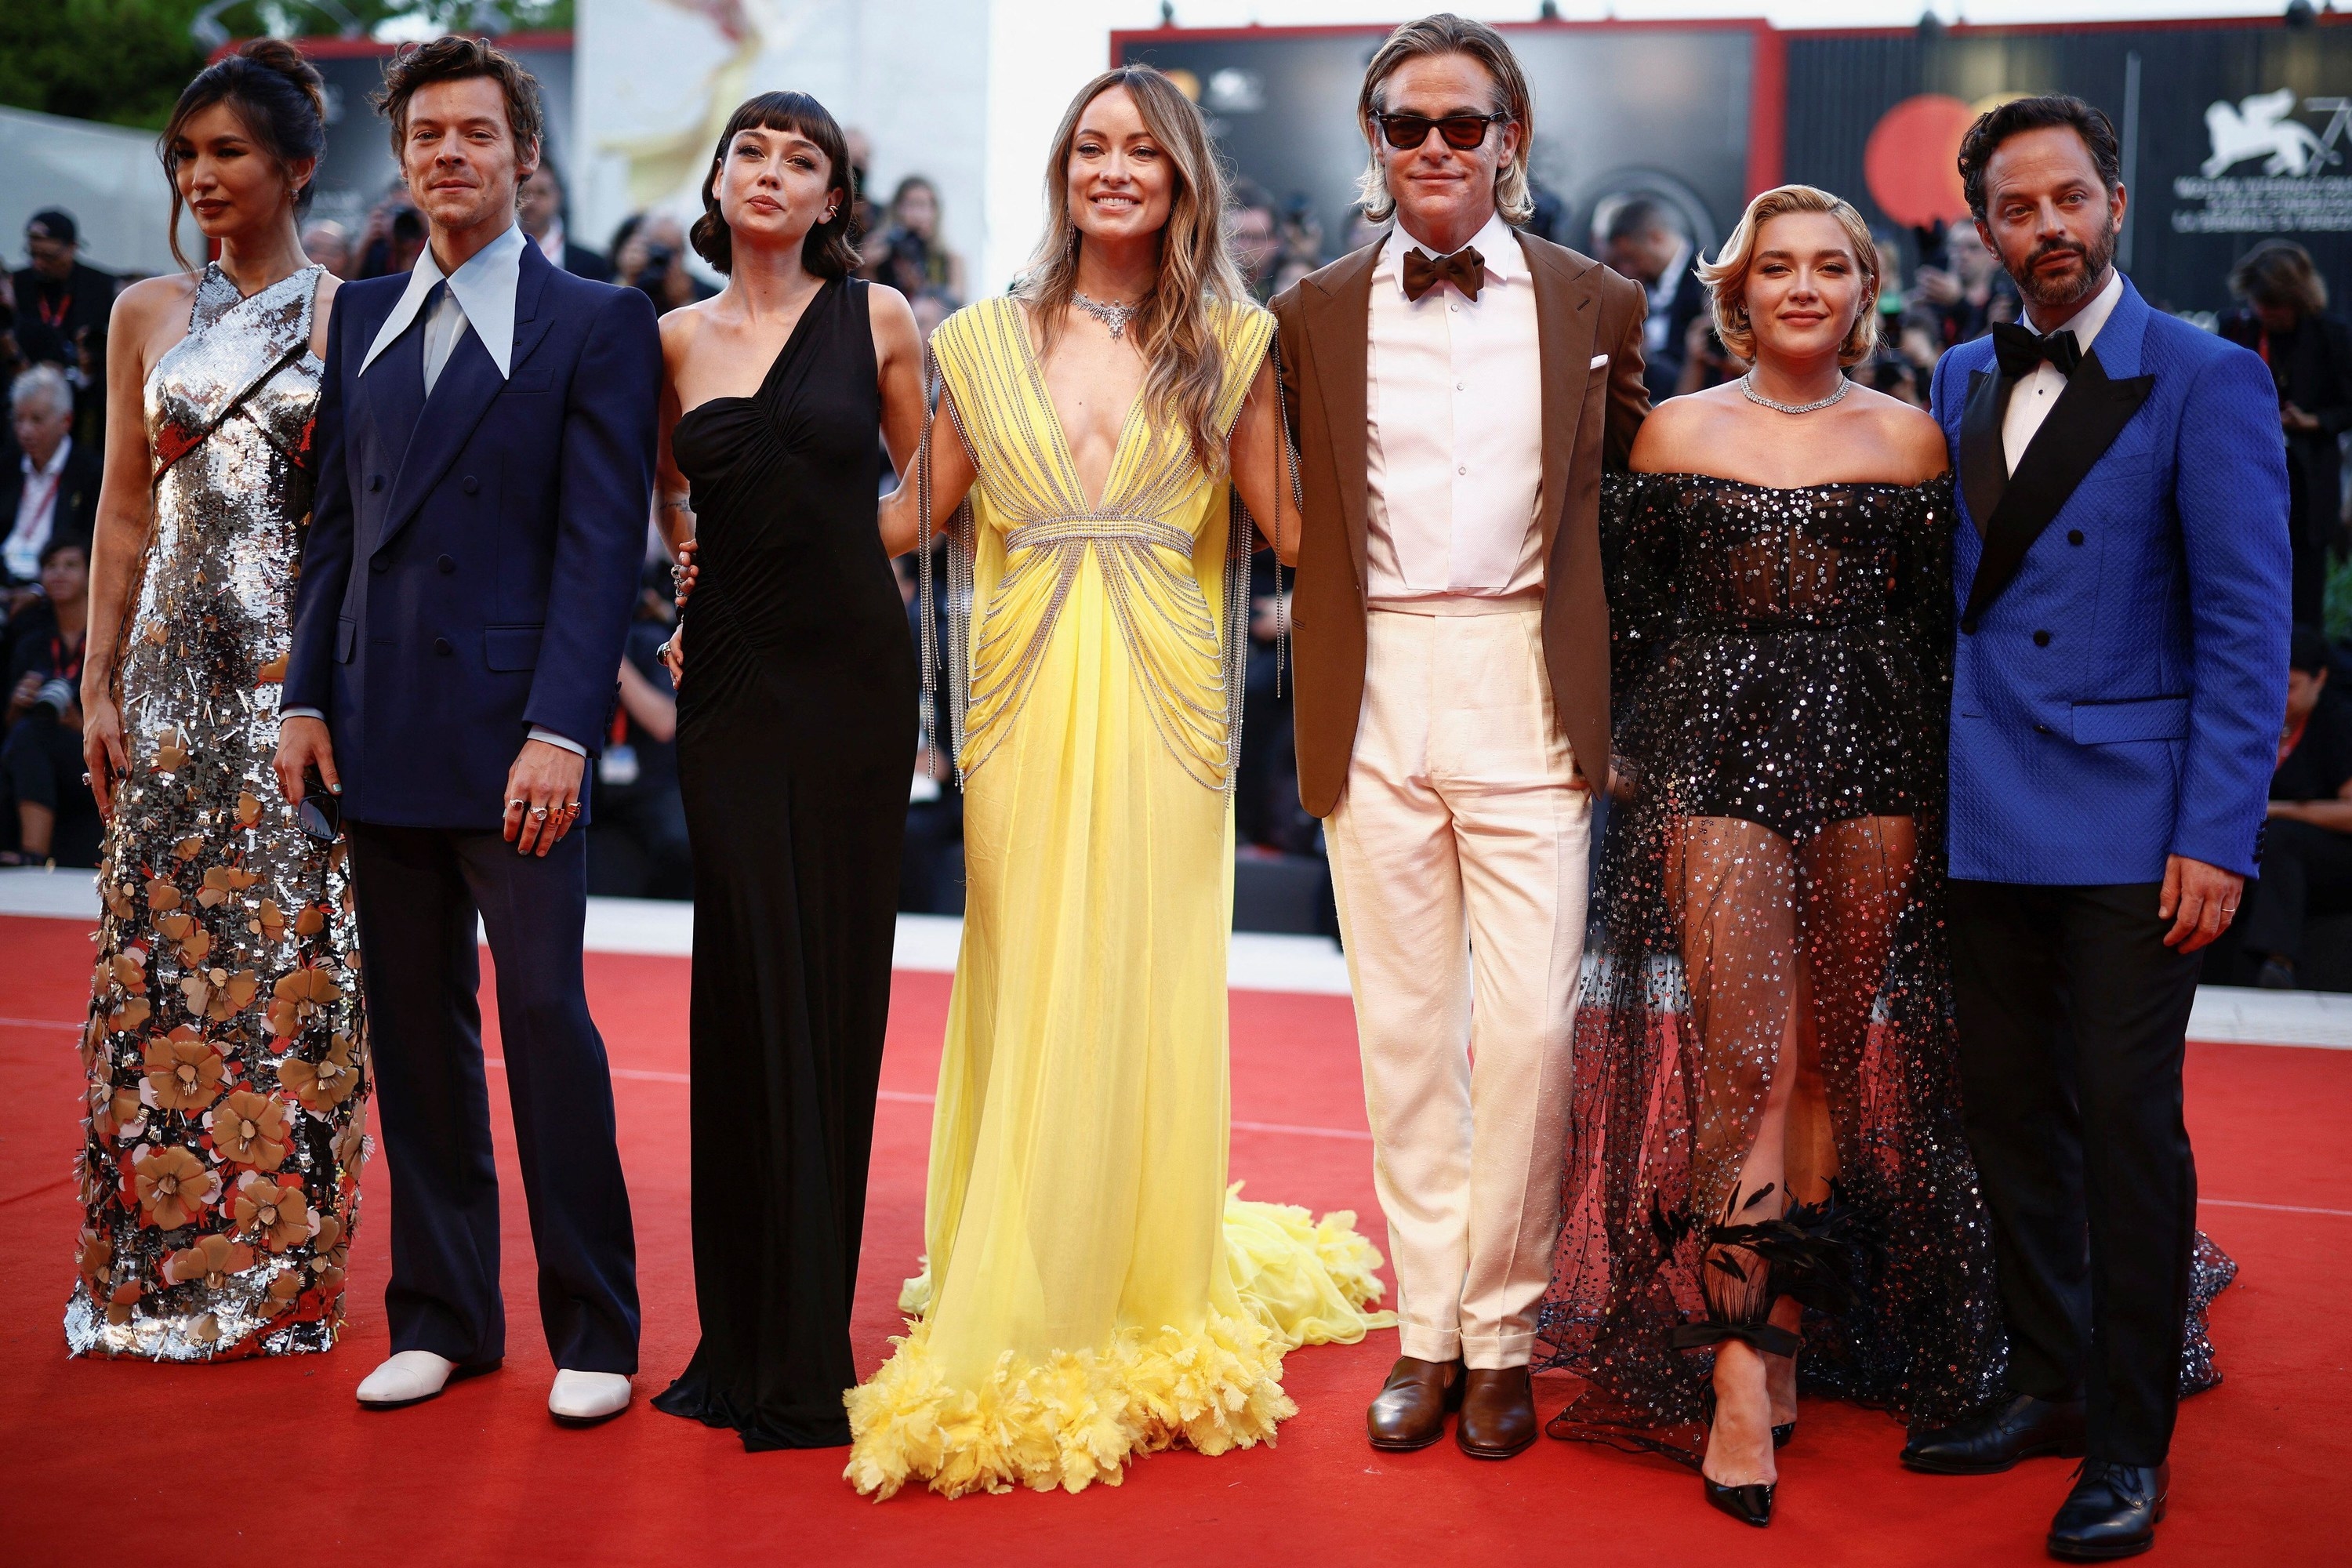 Gemma Chan, Harry Styles, Sydney Chandler, Olivia Wilde, Chris Pine and Florence Pugh at the Venice Film Festival premiere of Don’t Worry Darling.